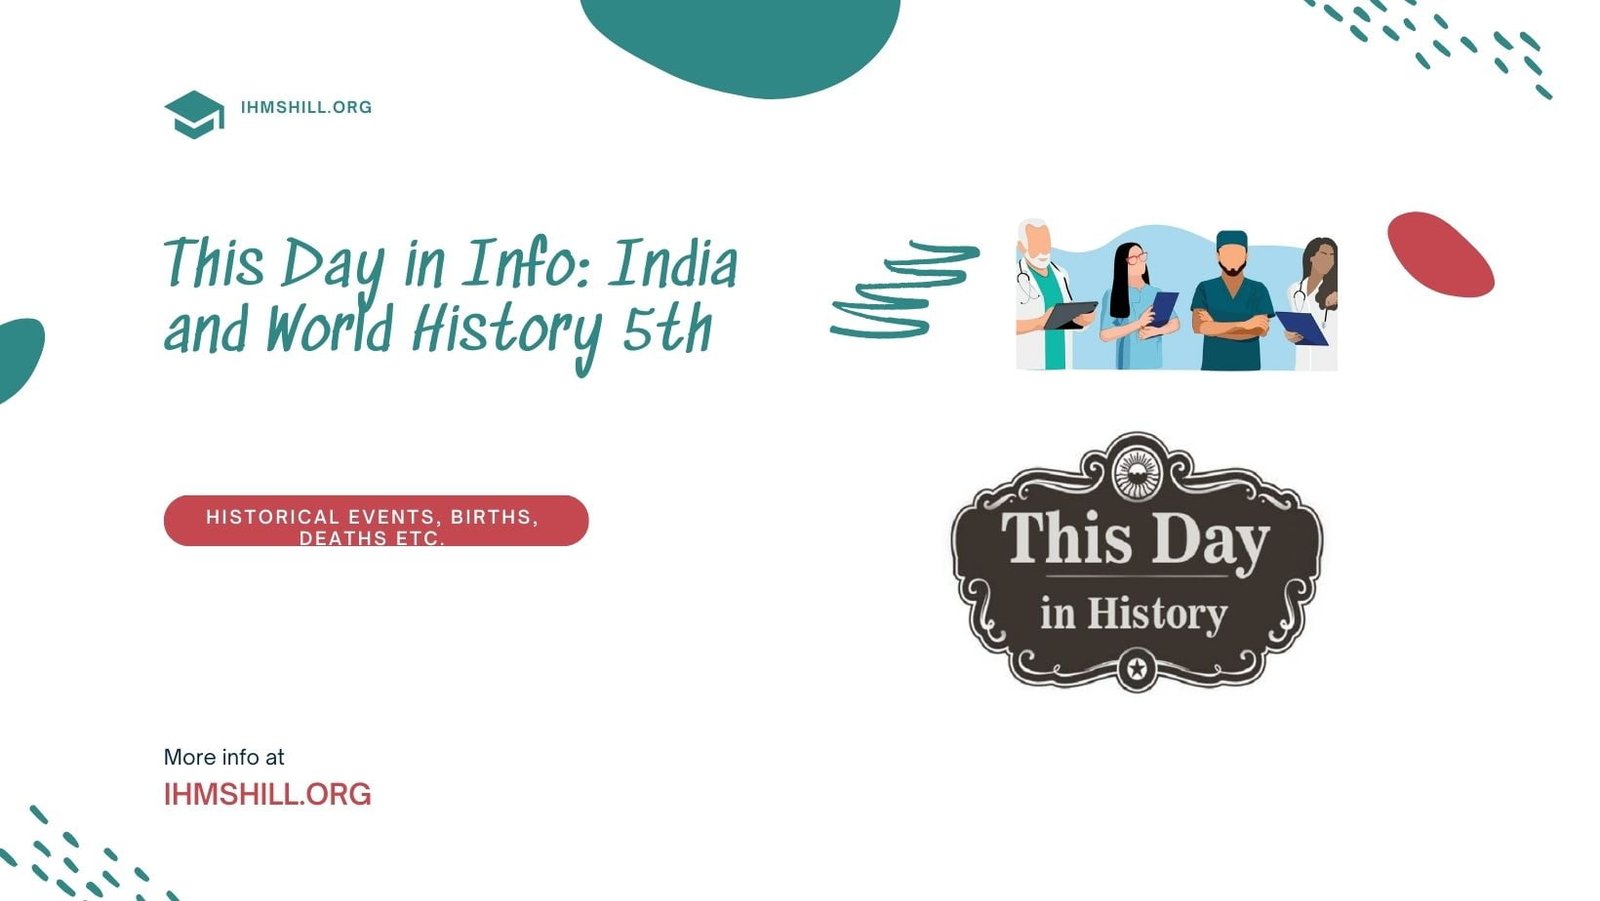 This Day in Info: India and World History 5th